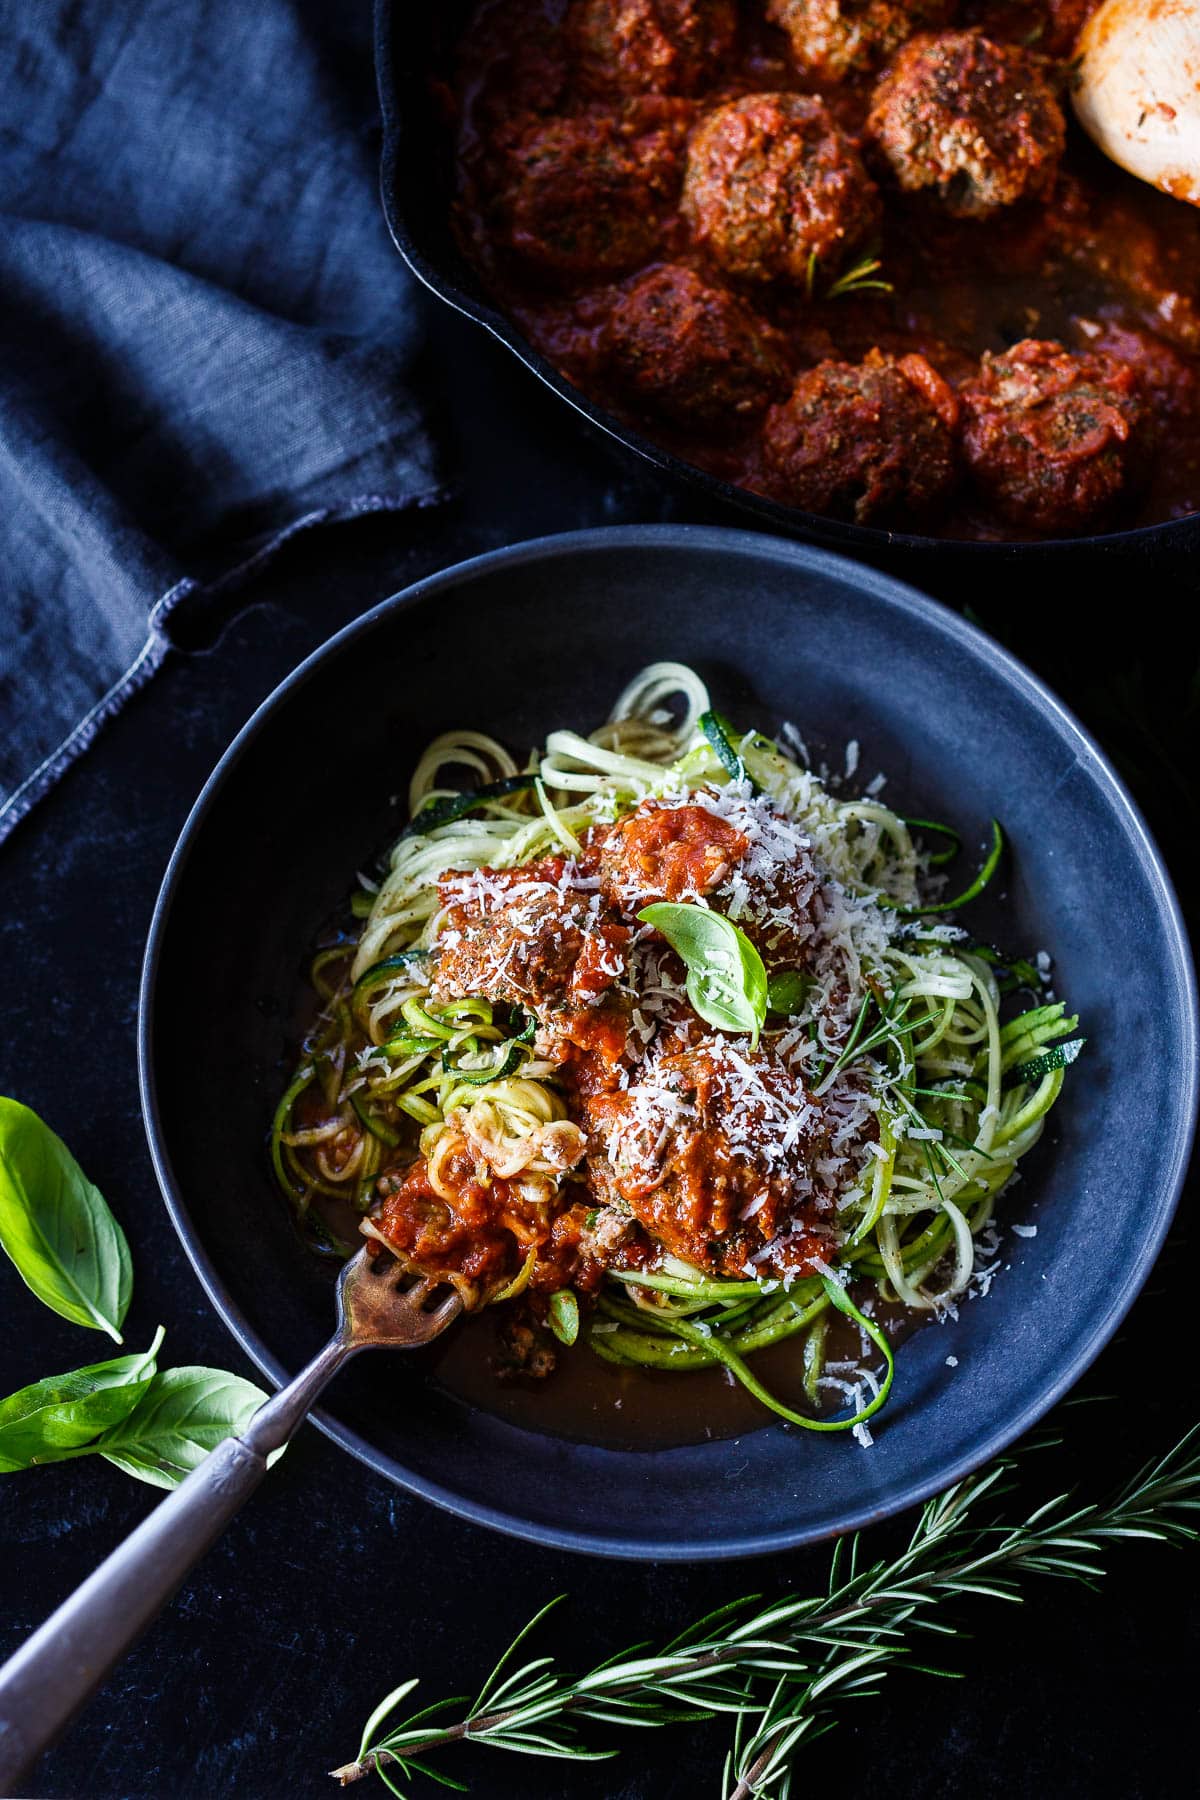 These flavorful Italian Meatballs are chock full of fresh herbs and savory goodness.  Fast and easy they can be made in 30 minutes. Serve them with zucchini noodles, roasted spaghetti squash, pasta, creamy polenta or in a roll. Low-carb, keto and gluten-free. 